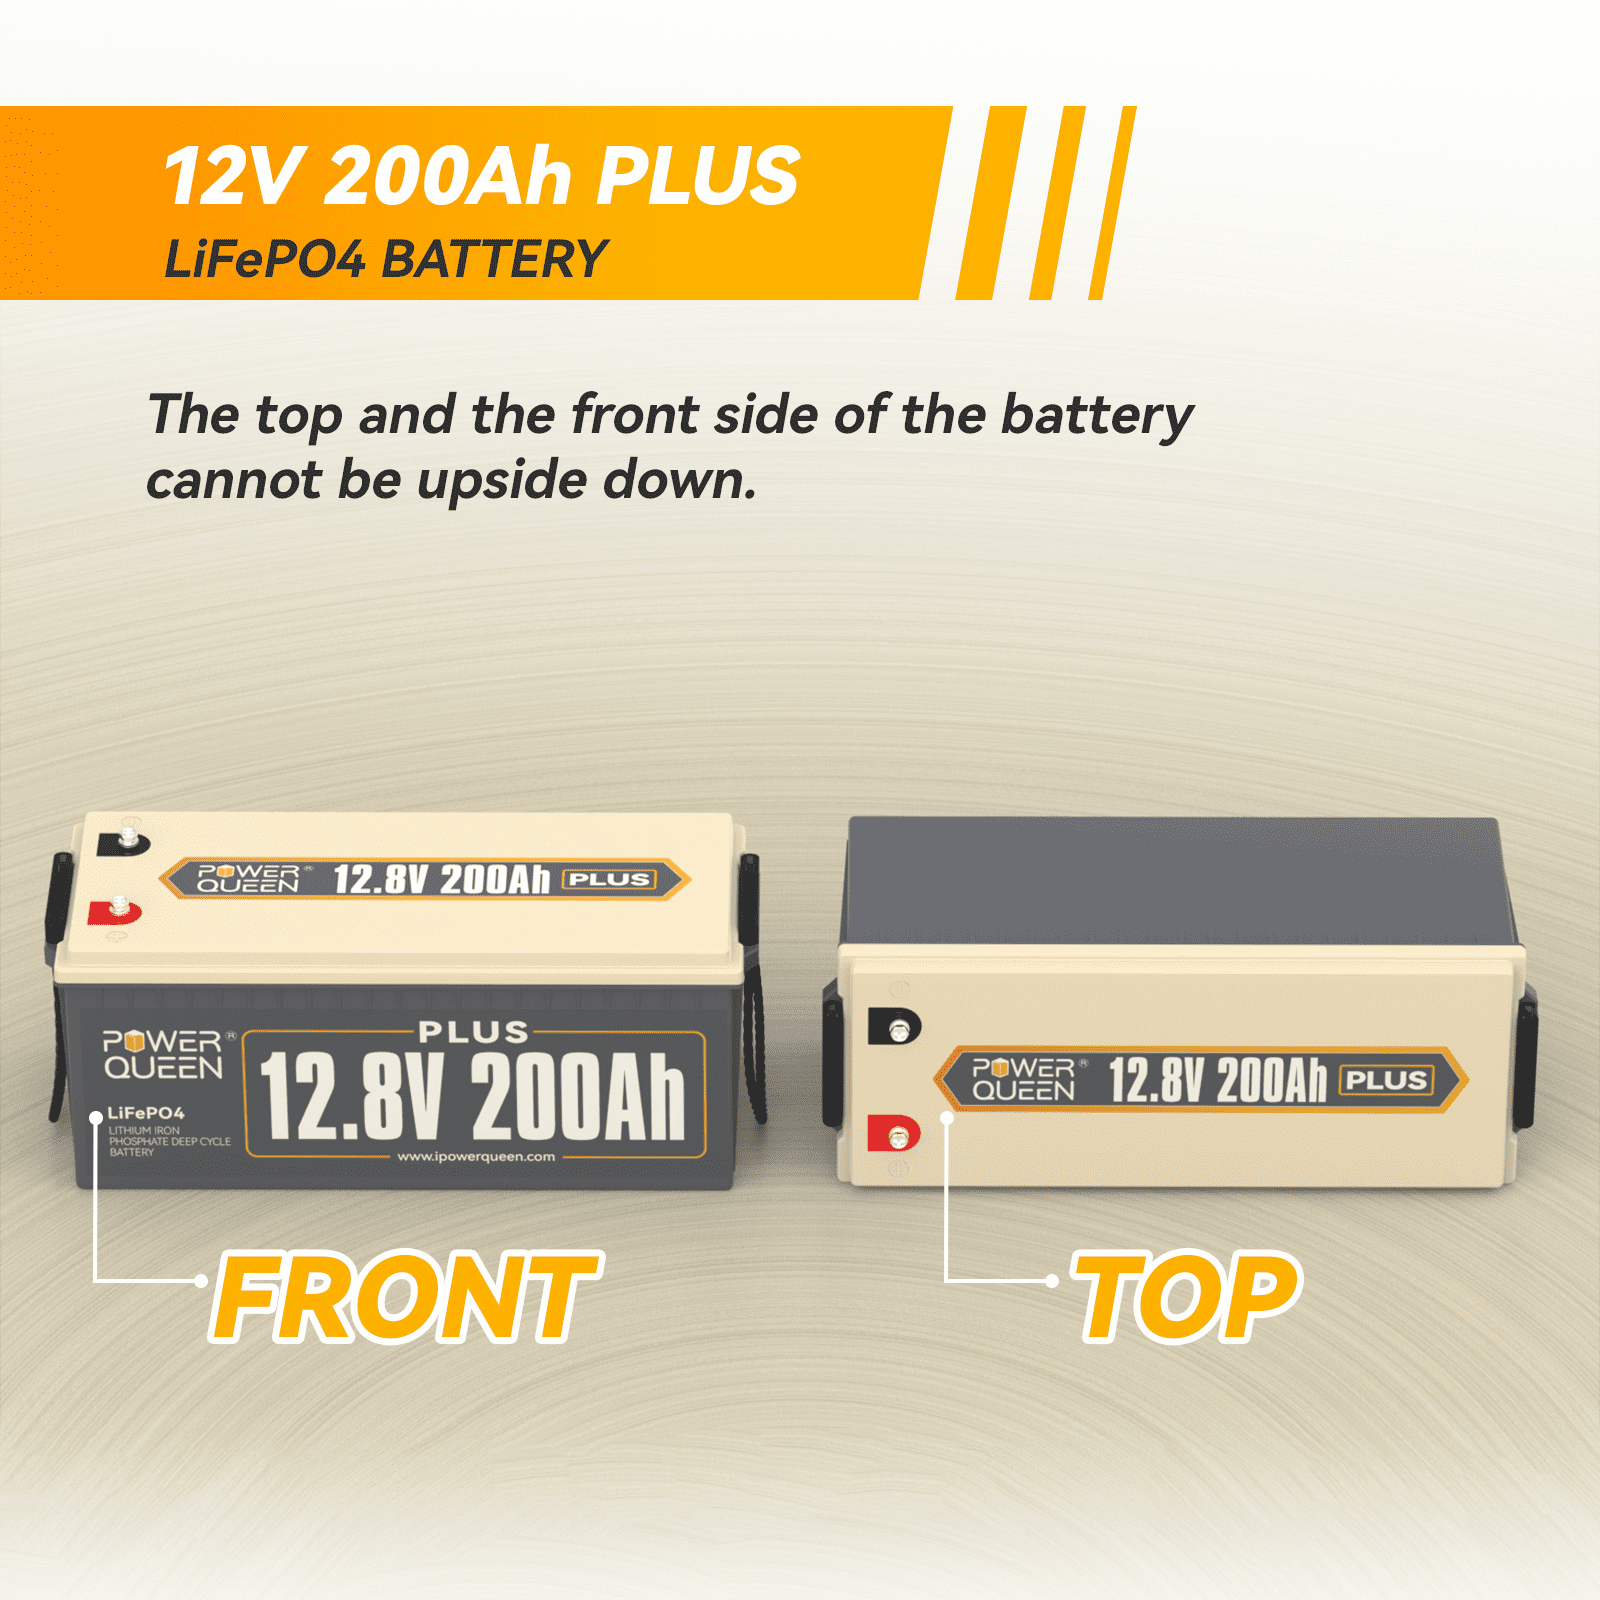 POWER QUEEN 12V 200Ah Plus LiFePO4 Deep Cycle Lithium Battery freeshipping  - ipowerqueen – Power Queen